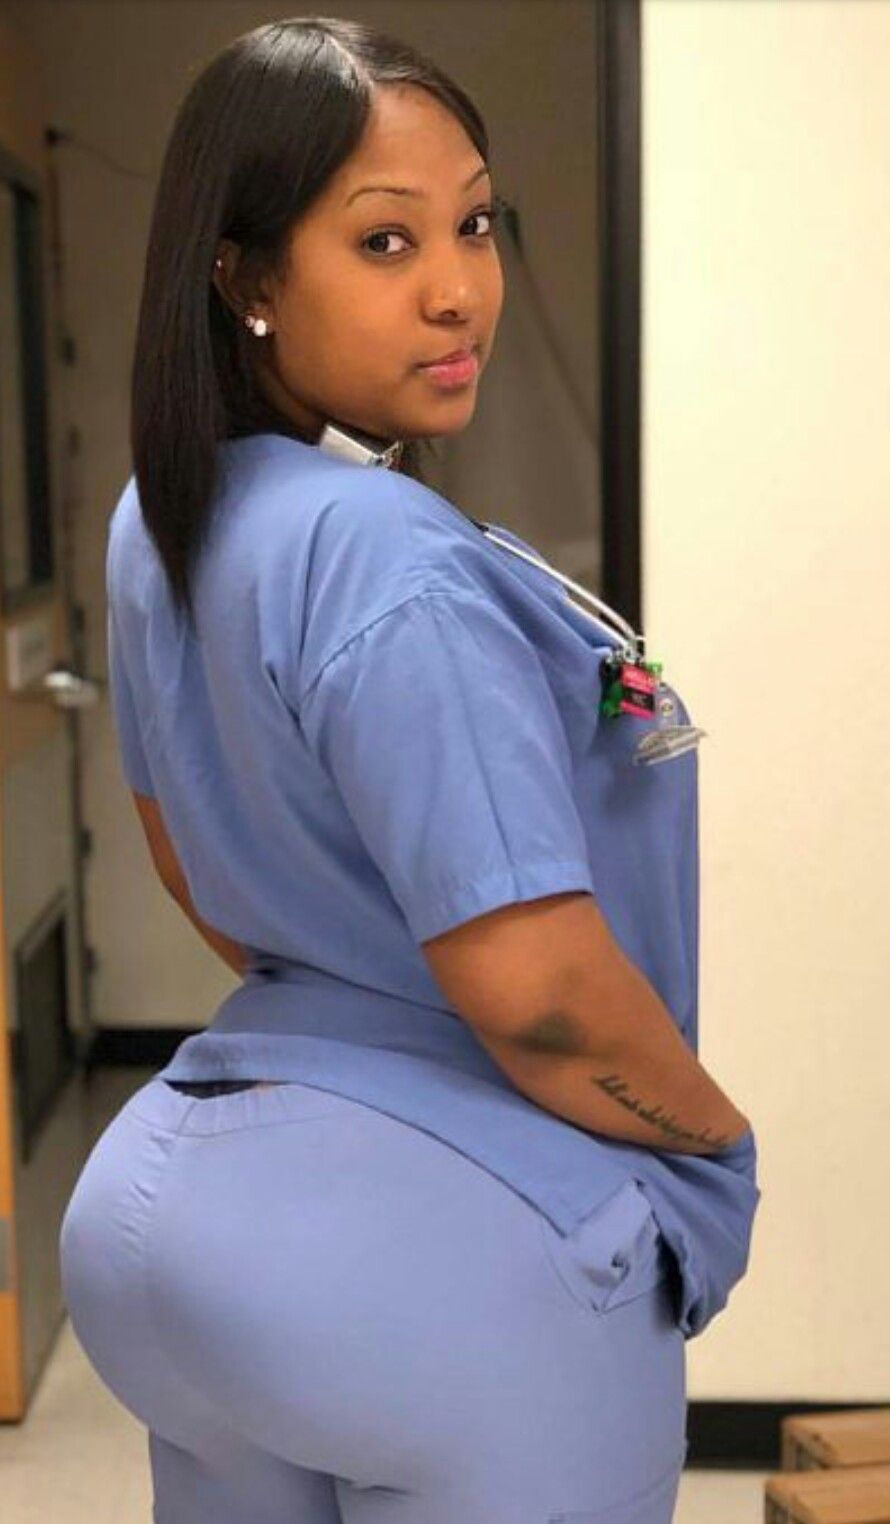 catherine torrey recommends big booty black nurses pic